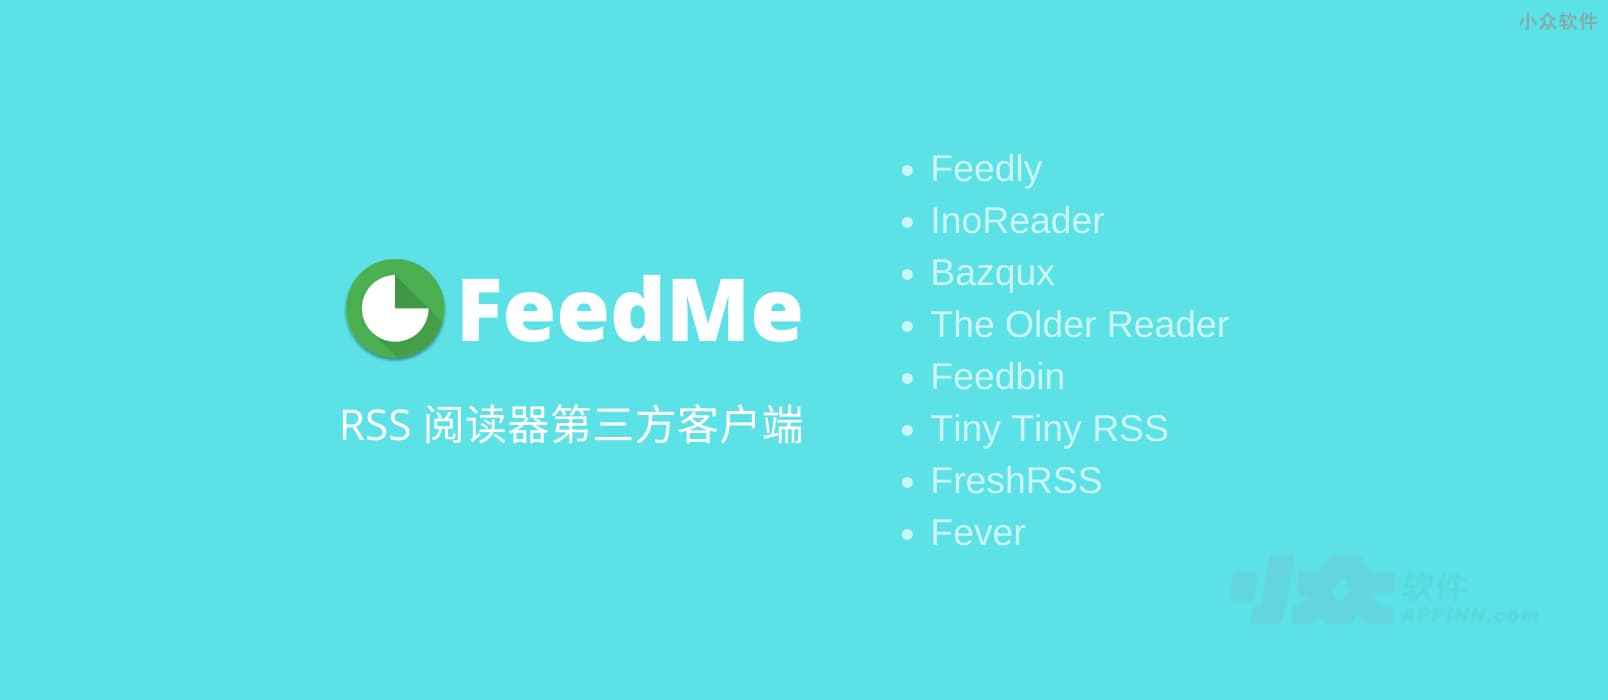 Feedme – 8大 RSS 阅读器第三方客户端[Android]